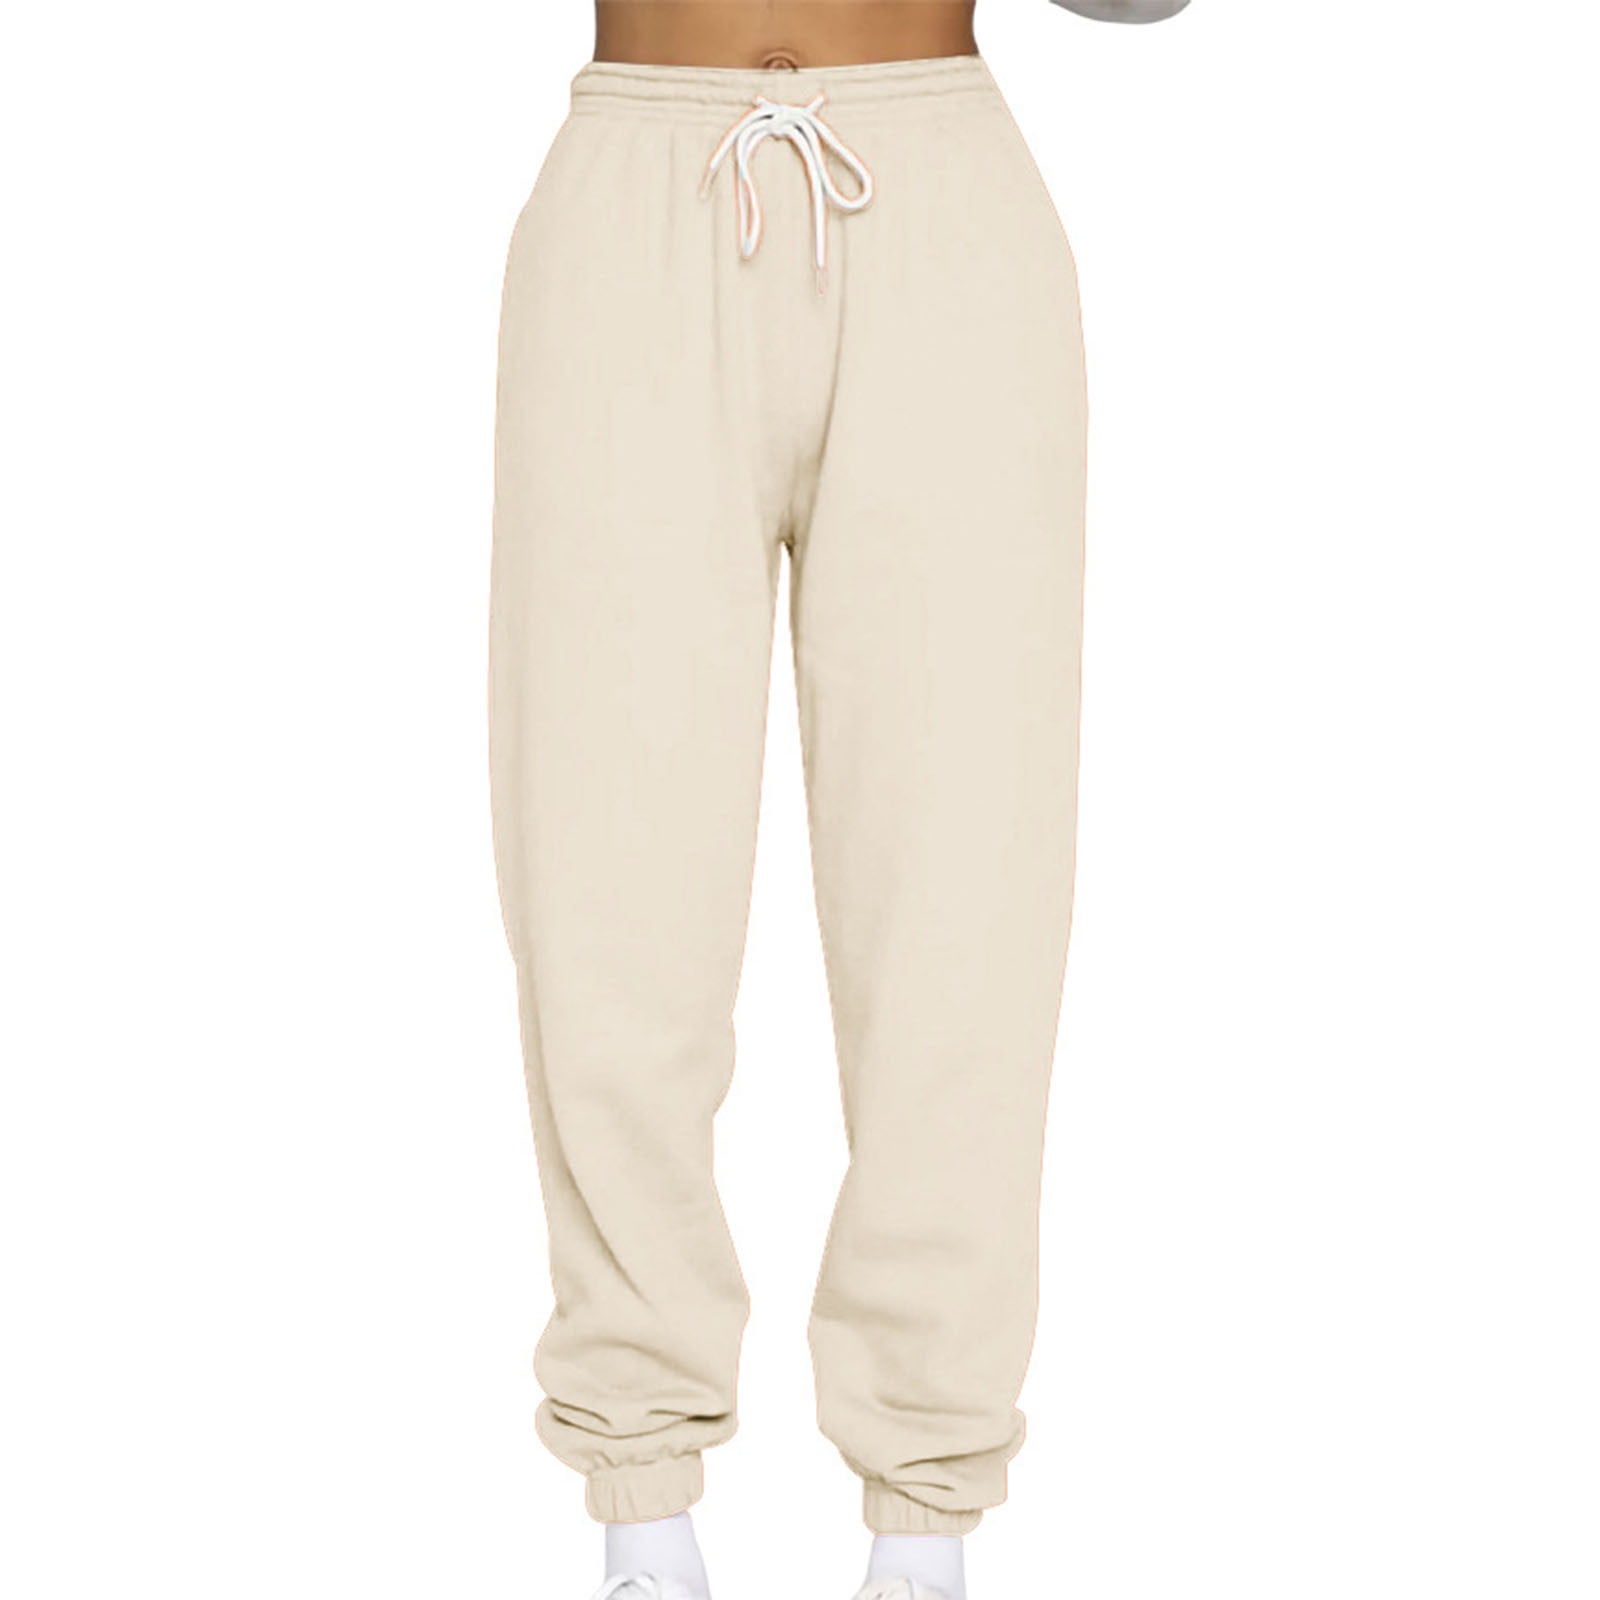 AUTOMET WomenAs High Waisted Sweatpants Baggy Fleece Lined Lounge Pants  comfy Wide Leg Drawstring Joggers with Pockets Beige